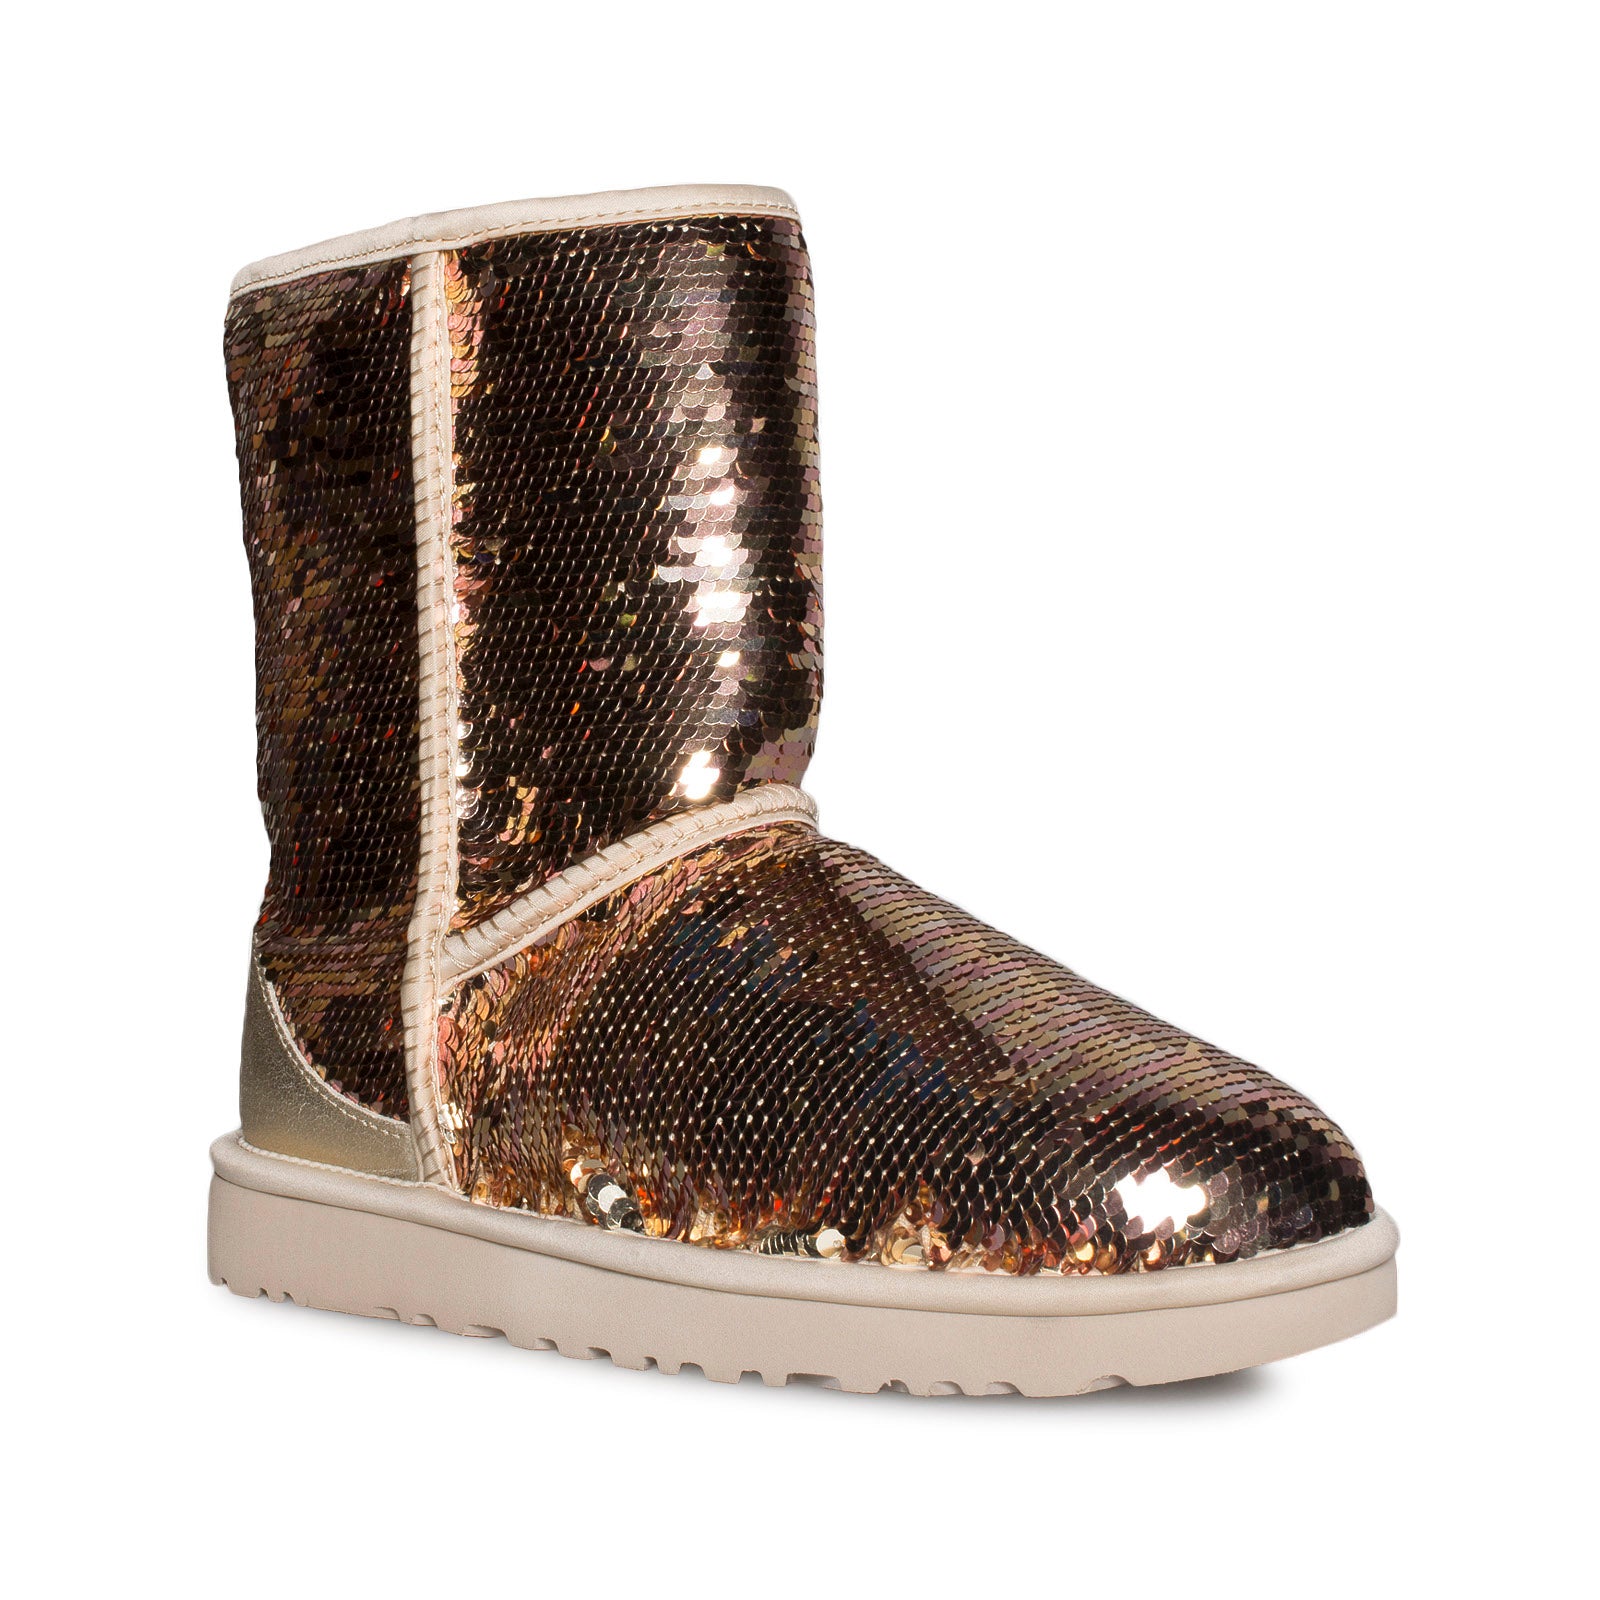 UGG Classic Short Sequin Gold Combo Boots - Women's - MyCozyBoots